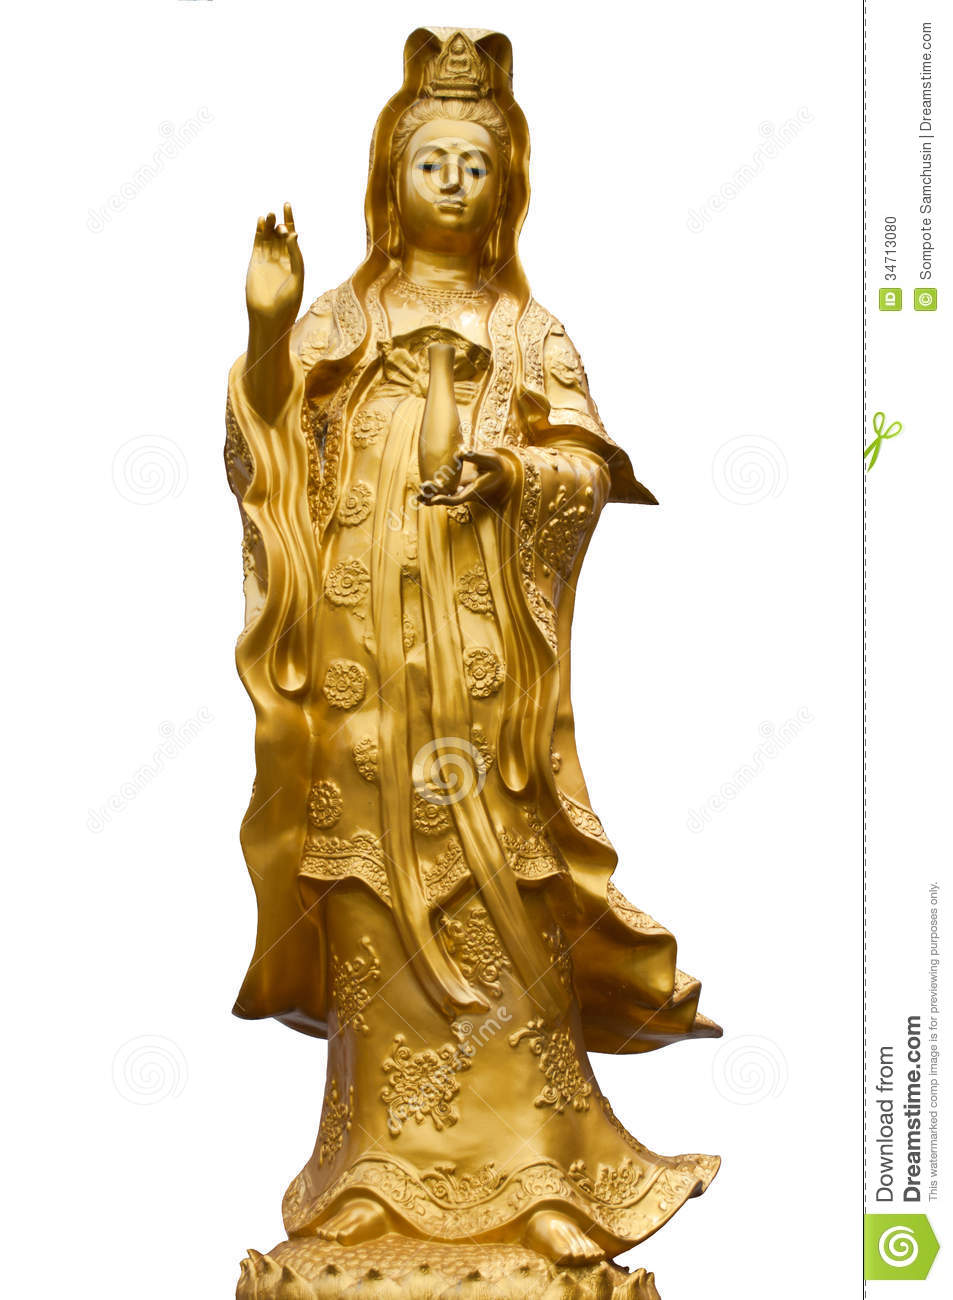 Golden Statue Of Guanyin Stock Photo.